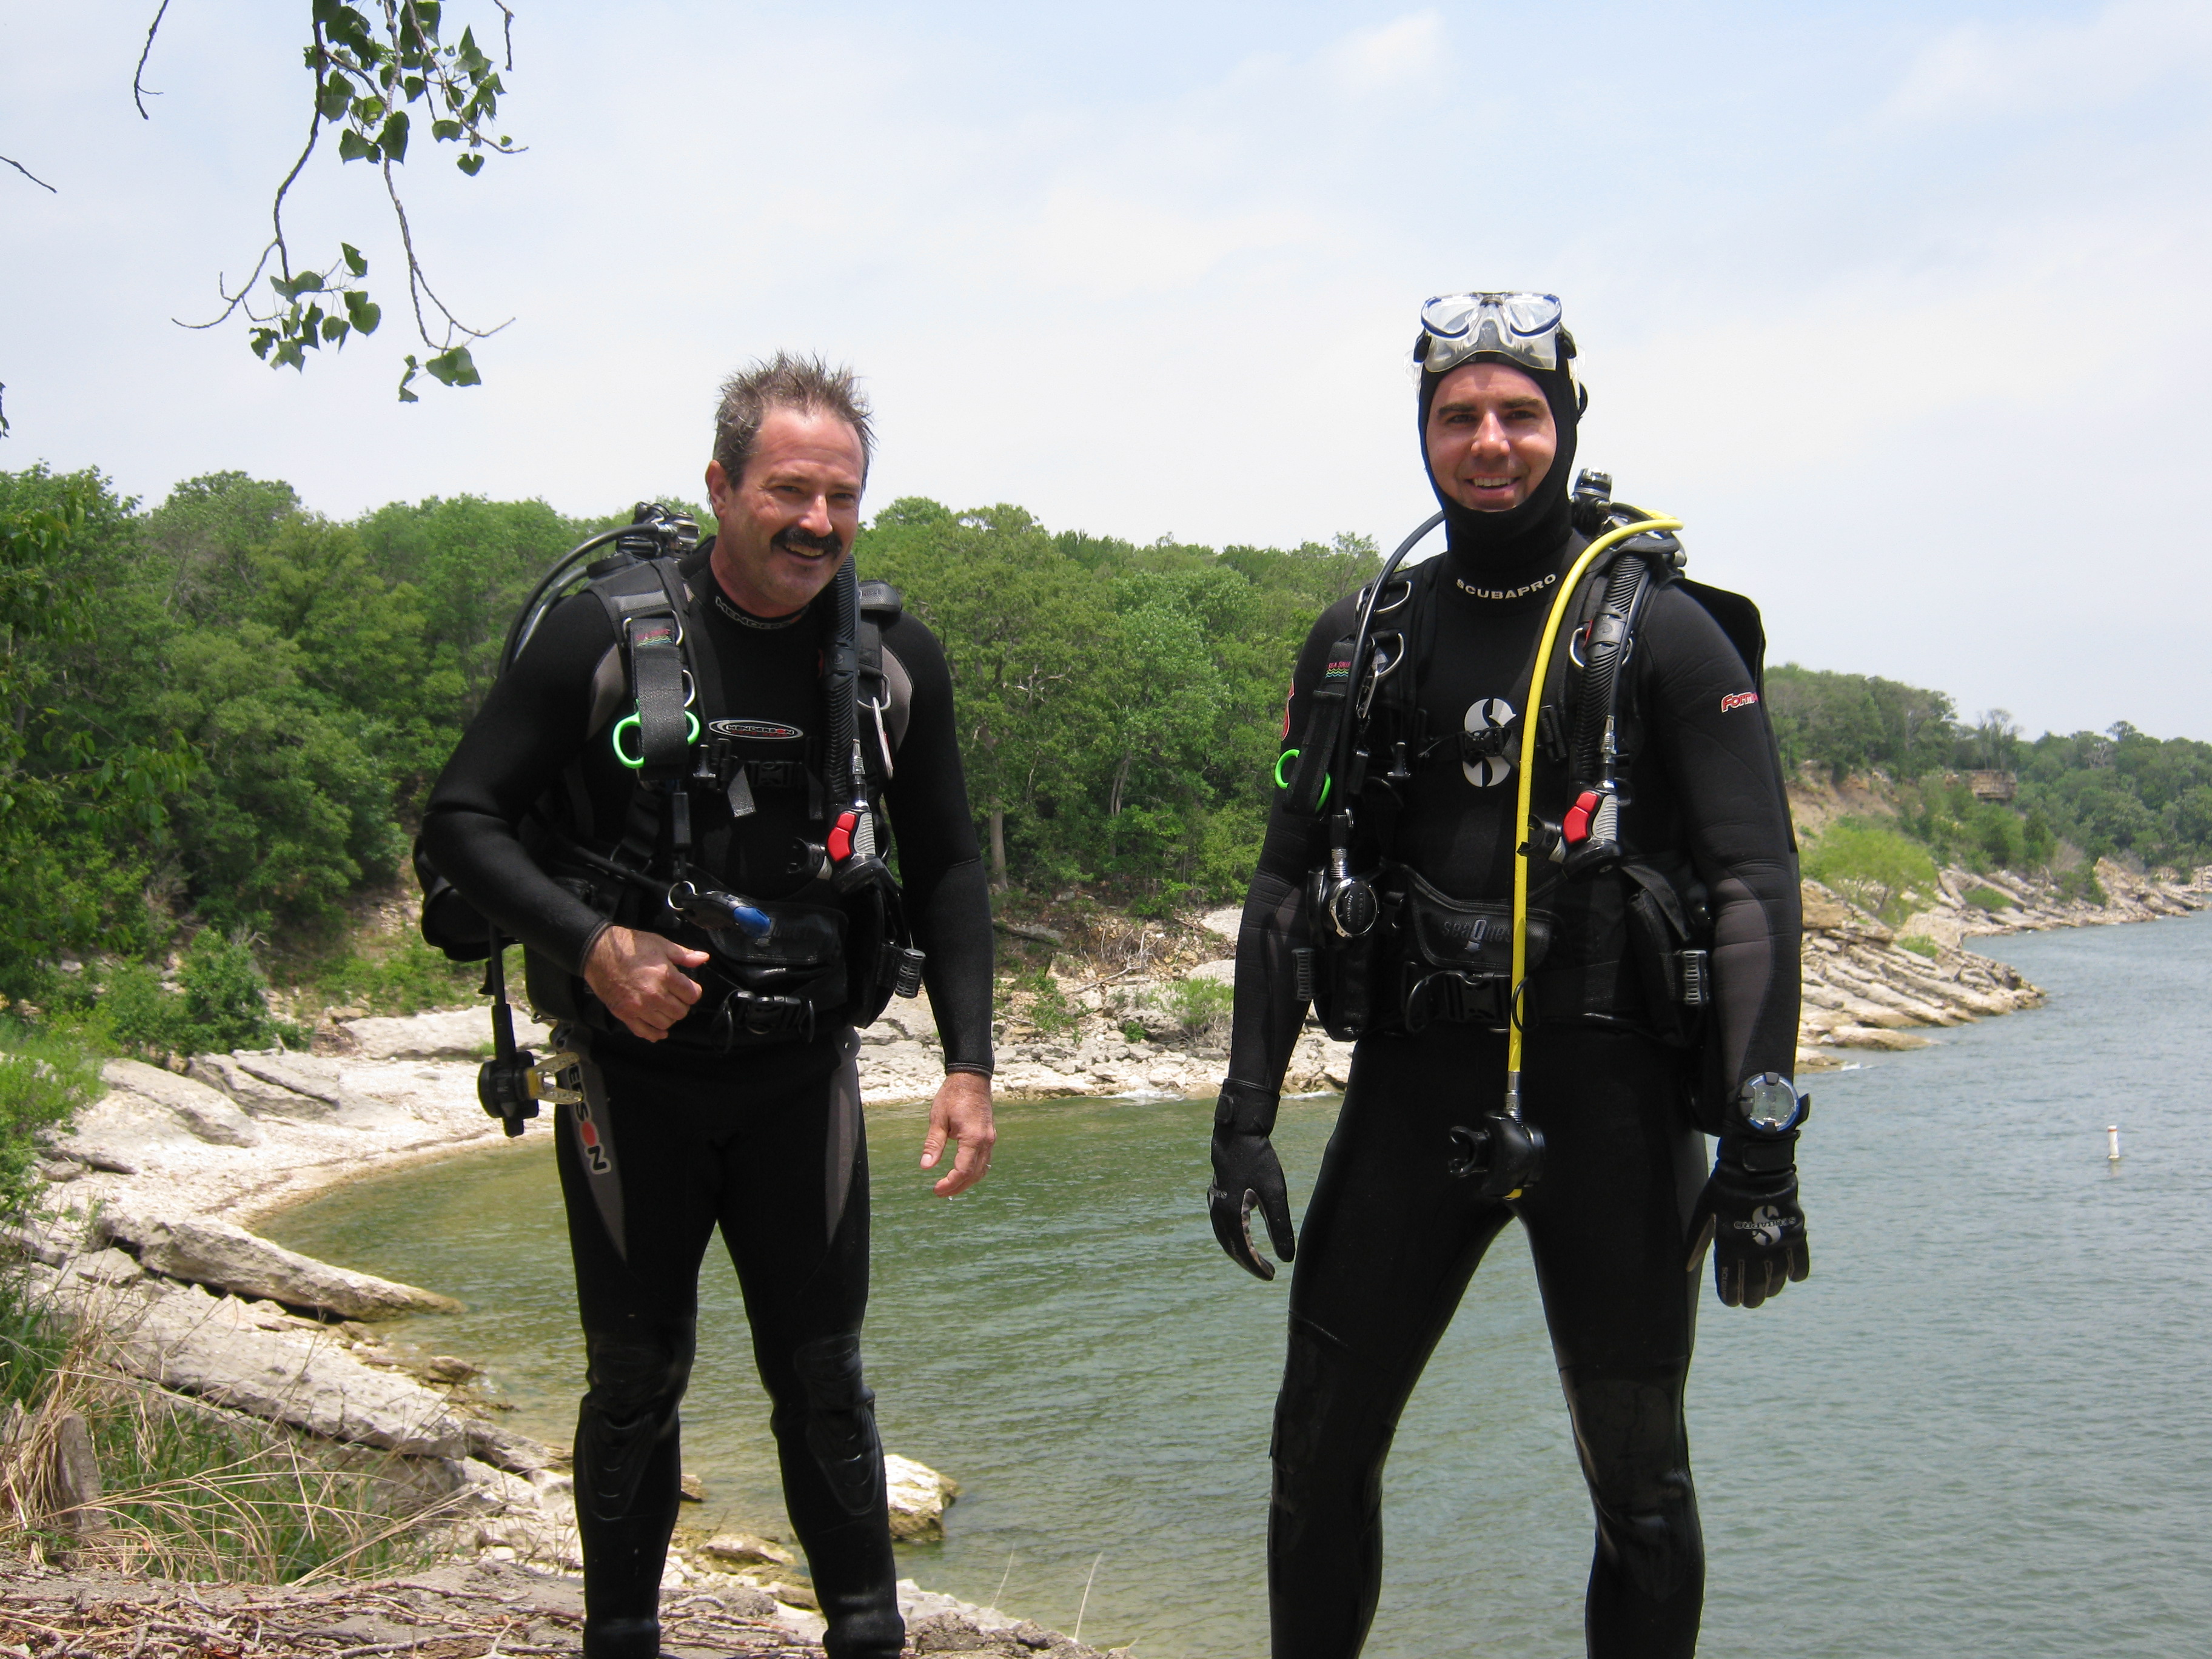 Two divers in full scuba gear, standing and facing the camera.  Lake and shoreline behind them.